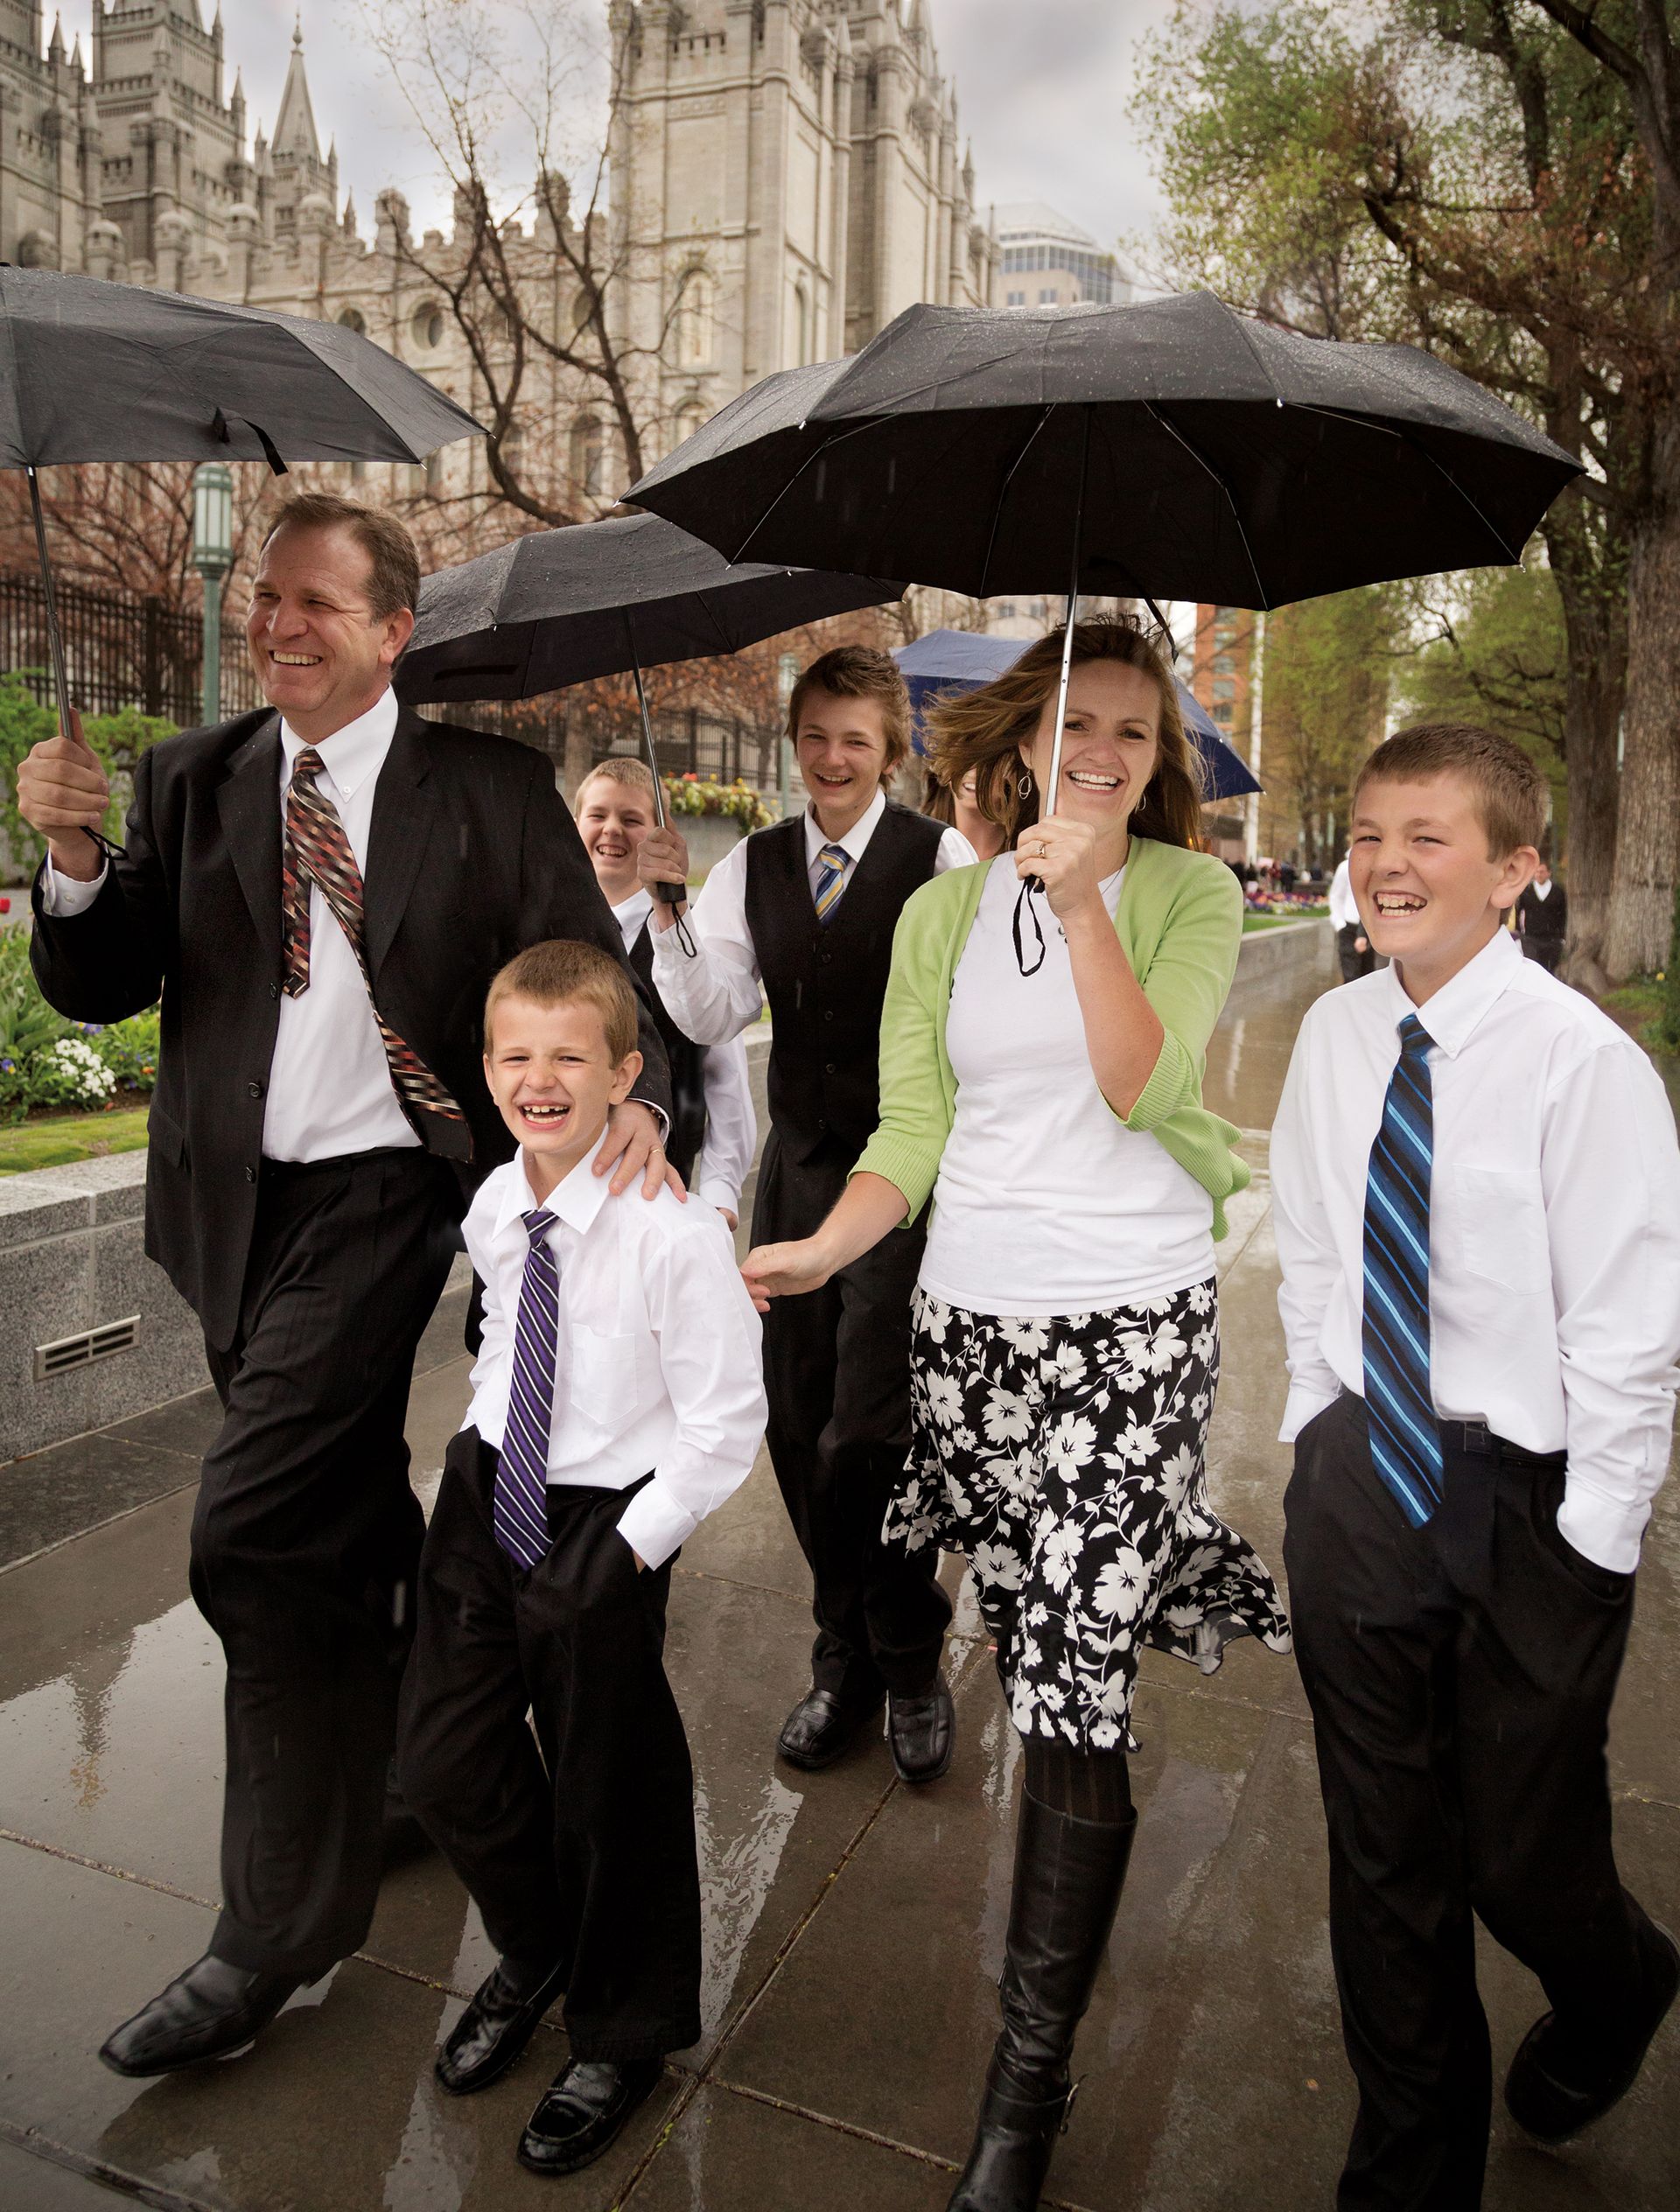 A family holding umbrellas as they walk through rain to the Conference Center.